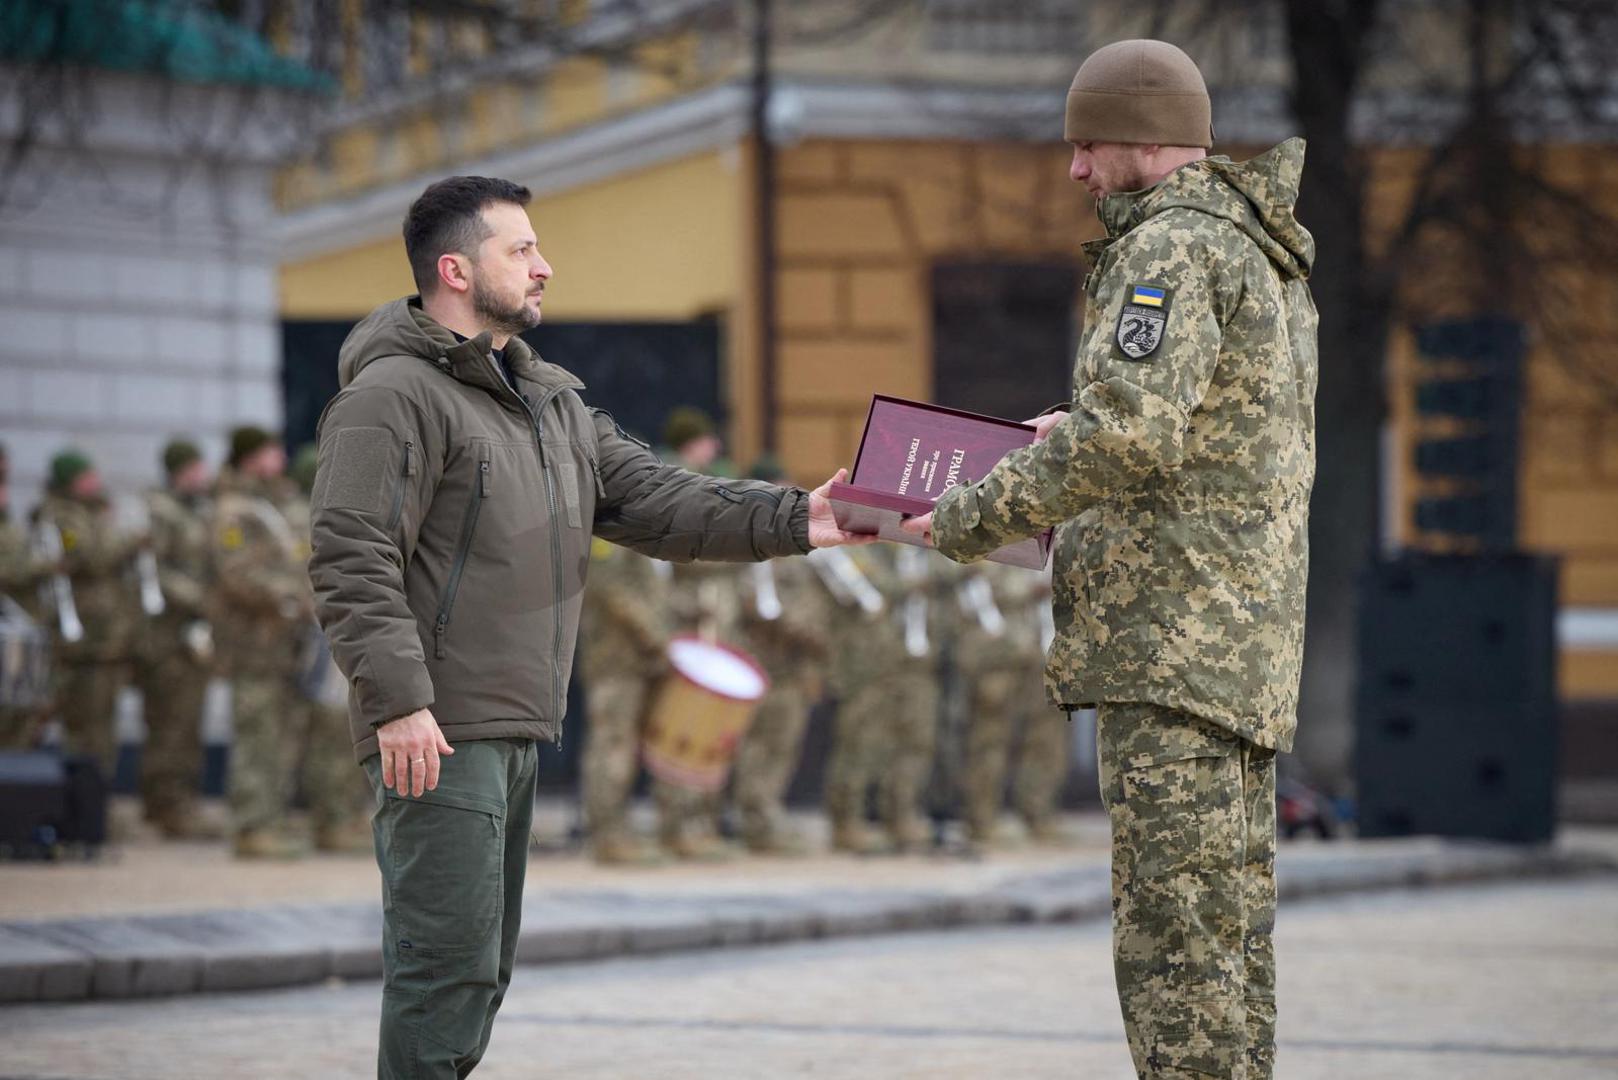 Ukraine's President Volodymyr Zelenskiy handovers a flag to a serviceman during a ceremony dedicated to the first anniversary of the Russian invasion of Ukraine, amid Russia's attack on Ukraine, in Kyiv, Ukraine February 24, 2023. Ukrainian Presidential Press Service/Handout via REUTERS ATTENTION EDITORS - THIS IMAGE HAS BEEN SUPPLIED BY A THIRD PARTY. Photo: Ukrainian Presidential Press Ser/REUTERS